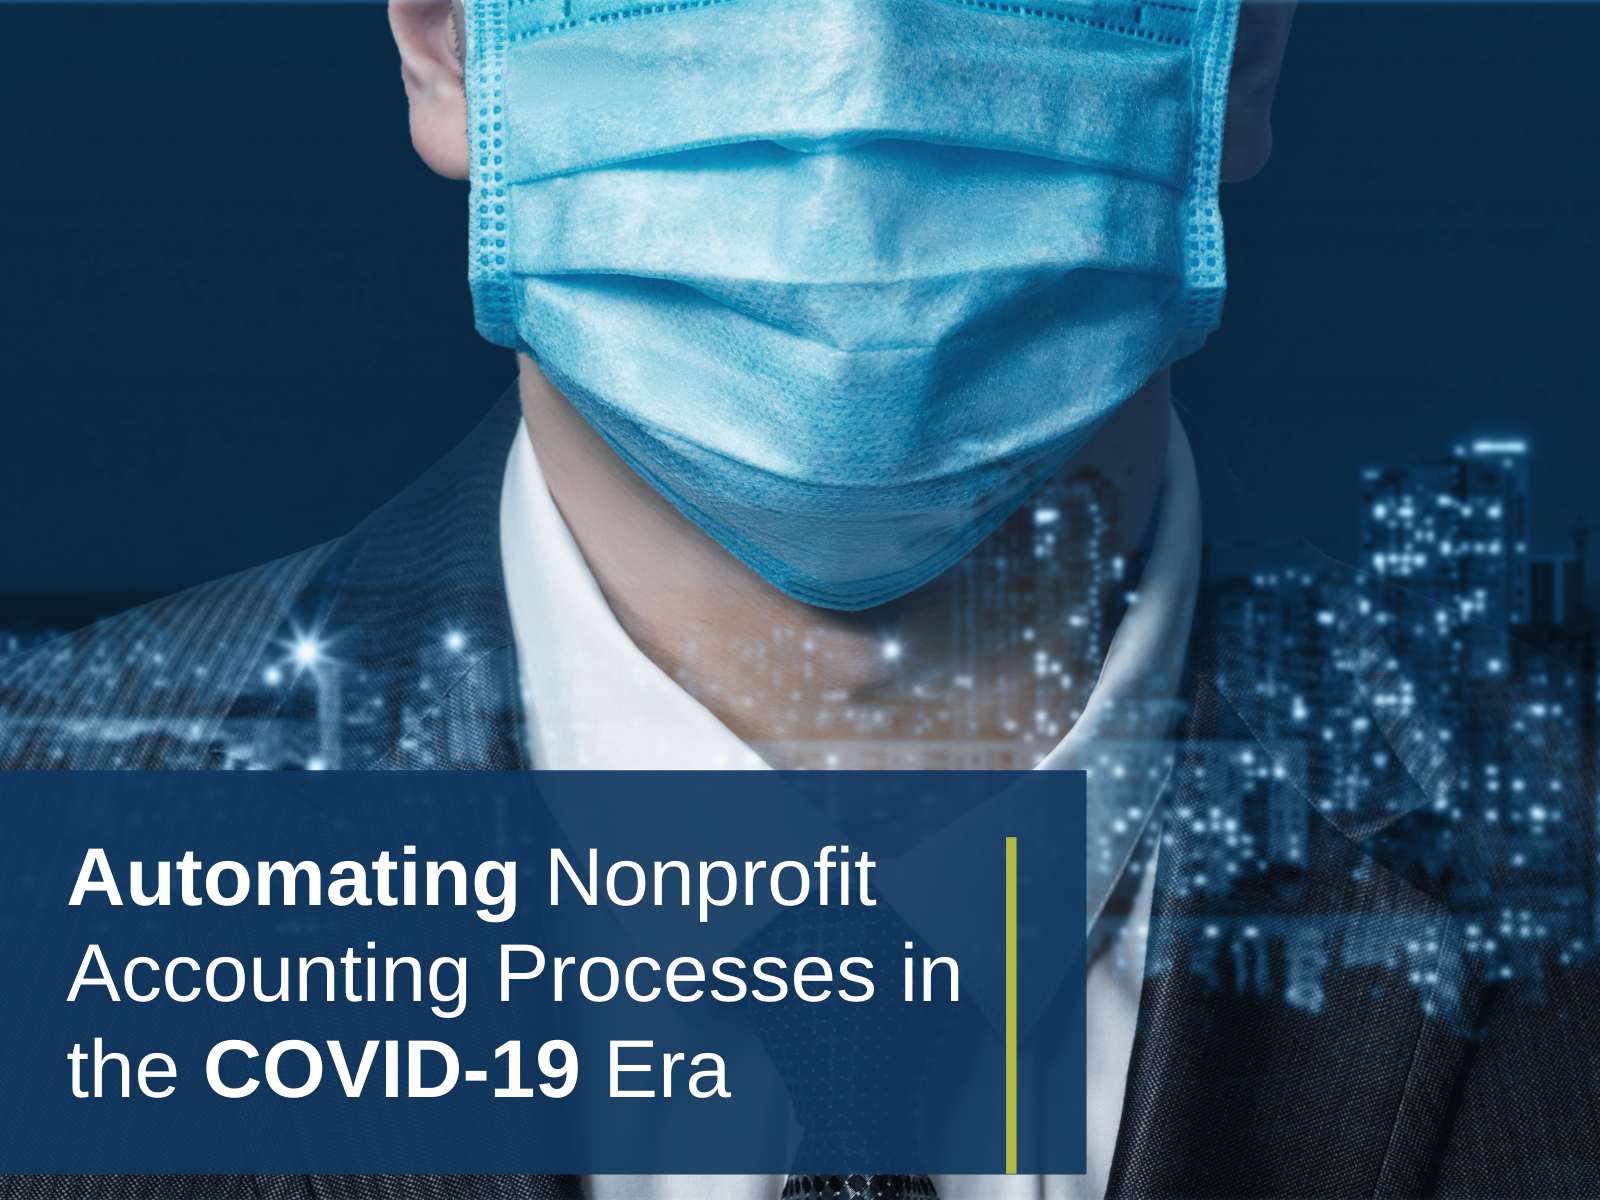 Nonprofit Remote Accounting in the COVID-19 Era: Automating Accounting Processes for Greater Simplicity & Security